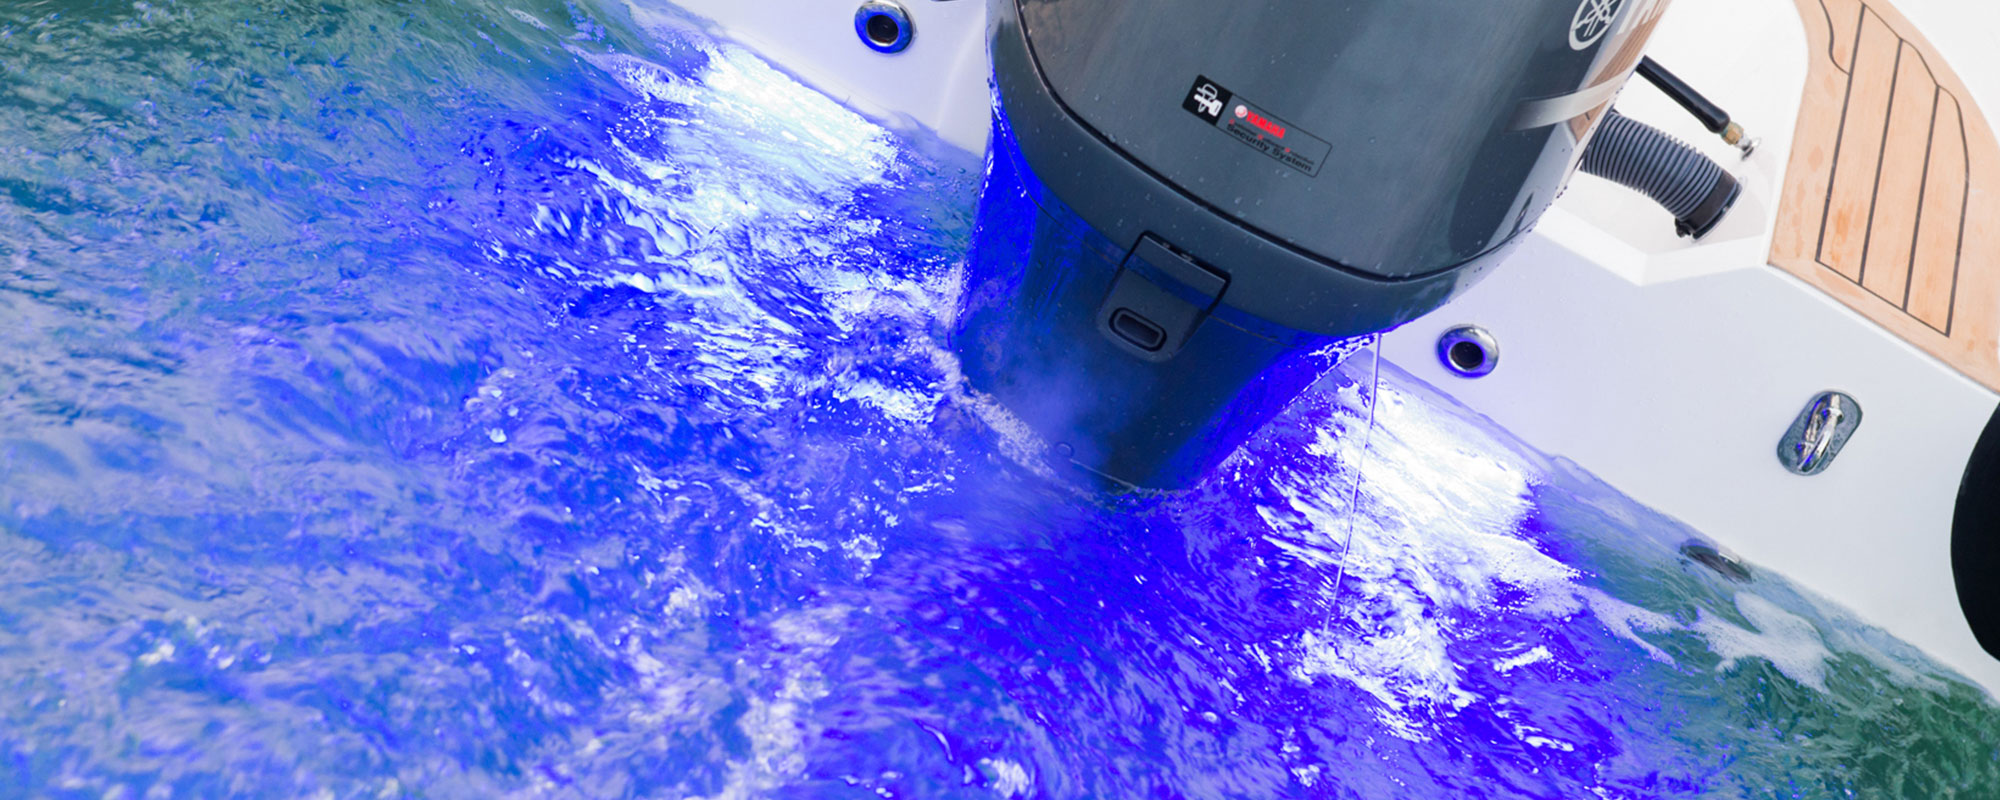 speed boat using a blue led light